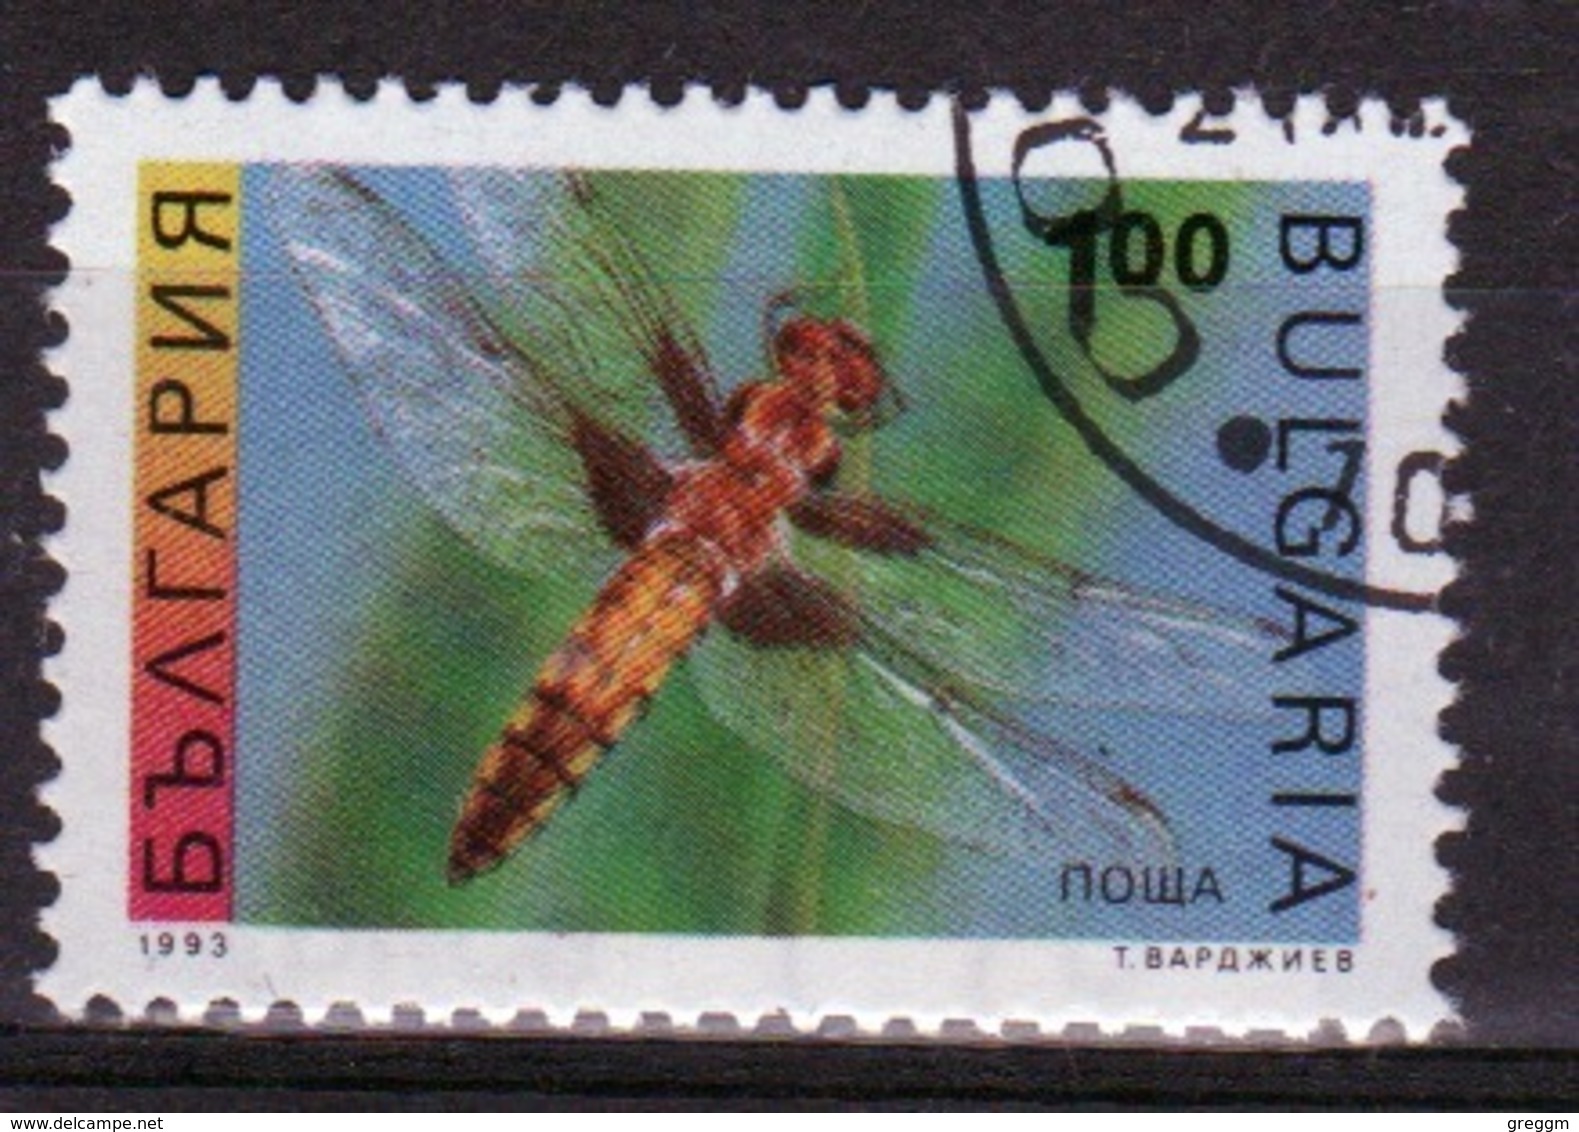 Bulgaria 1992 Single 1L Stamp From The Insects Series. - Used Stamps